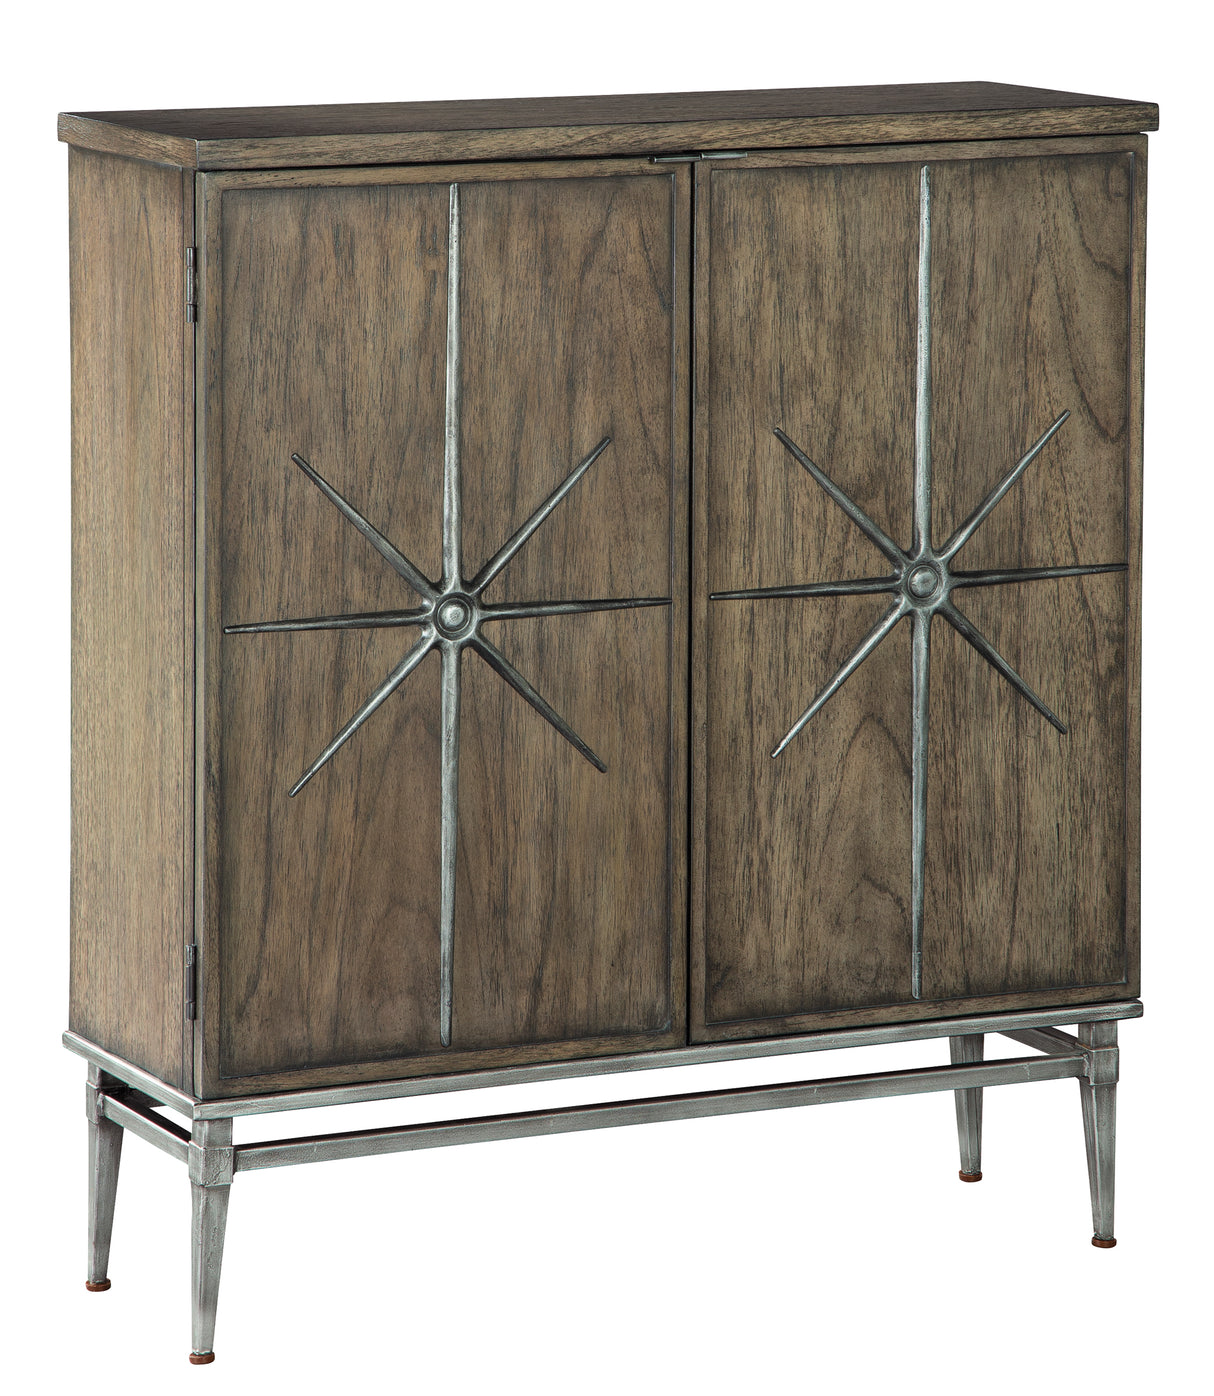 Hekman 28023 Accents 36in. x 12in. x 41in. Accent Chest